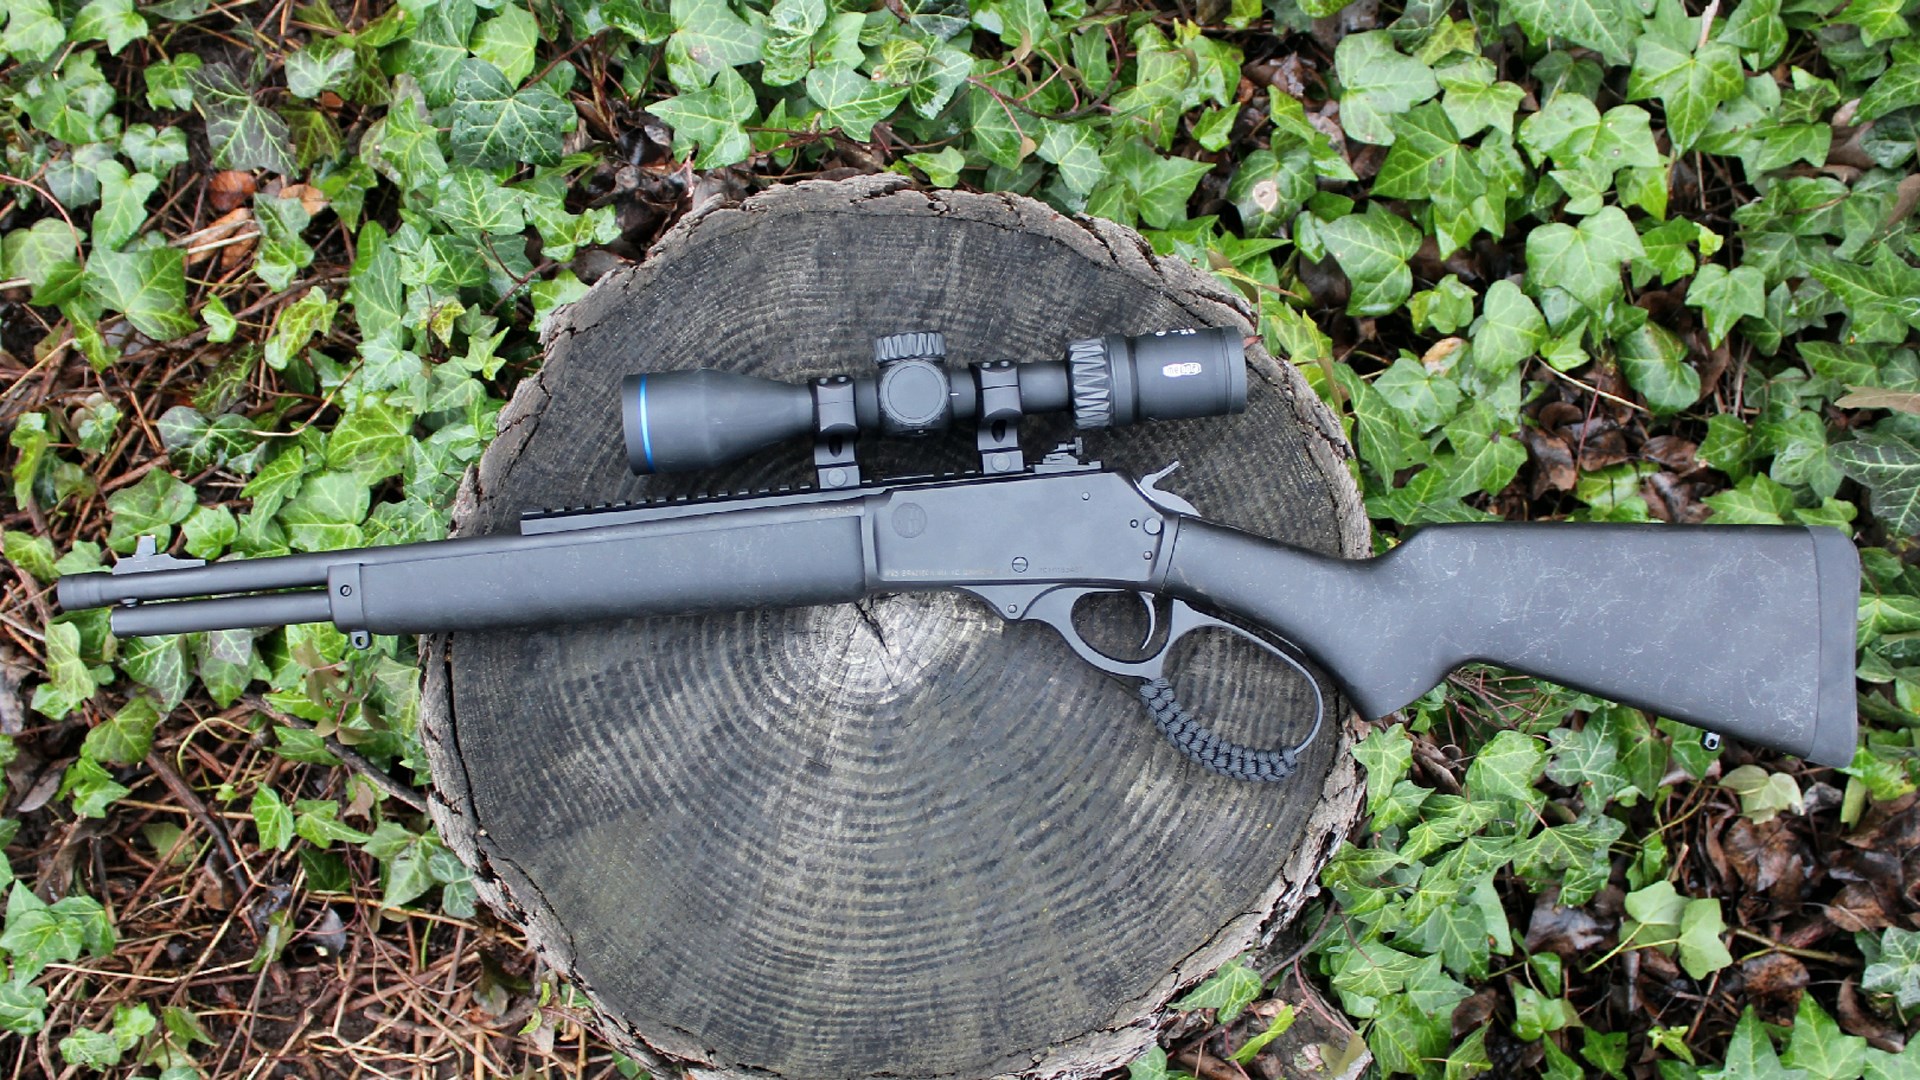 Rossi R95 Triple Black left-side view lever-action rifle shown with riflescope on stump outdoors green ivy background